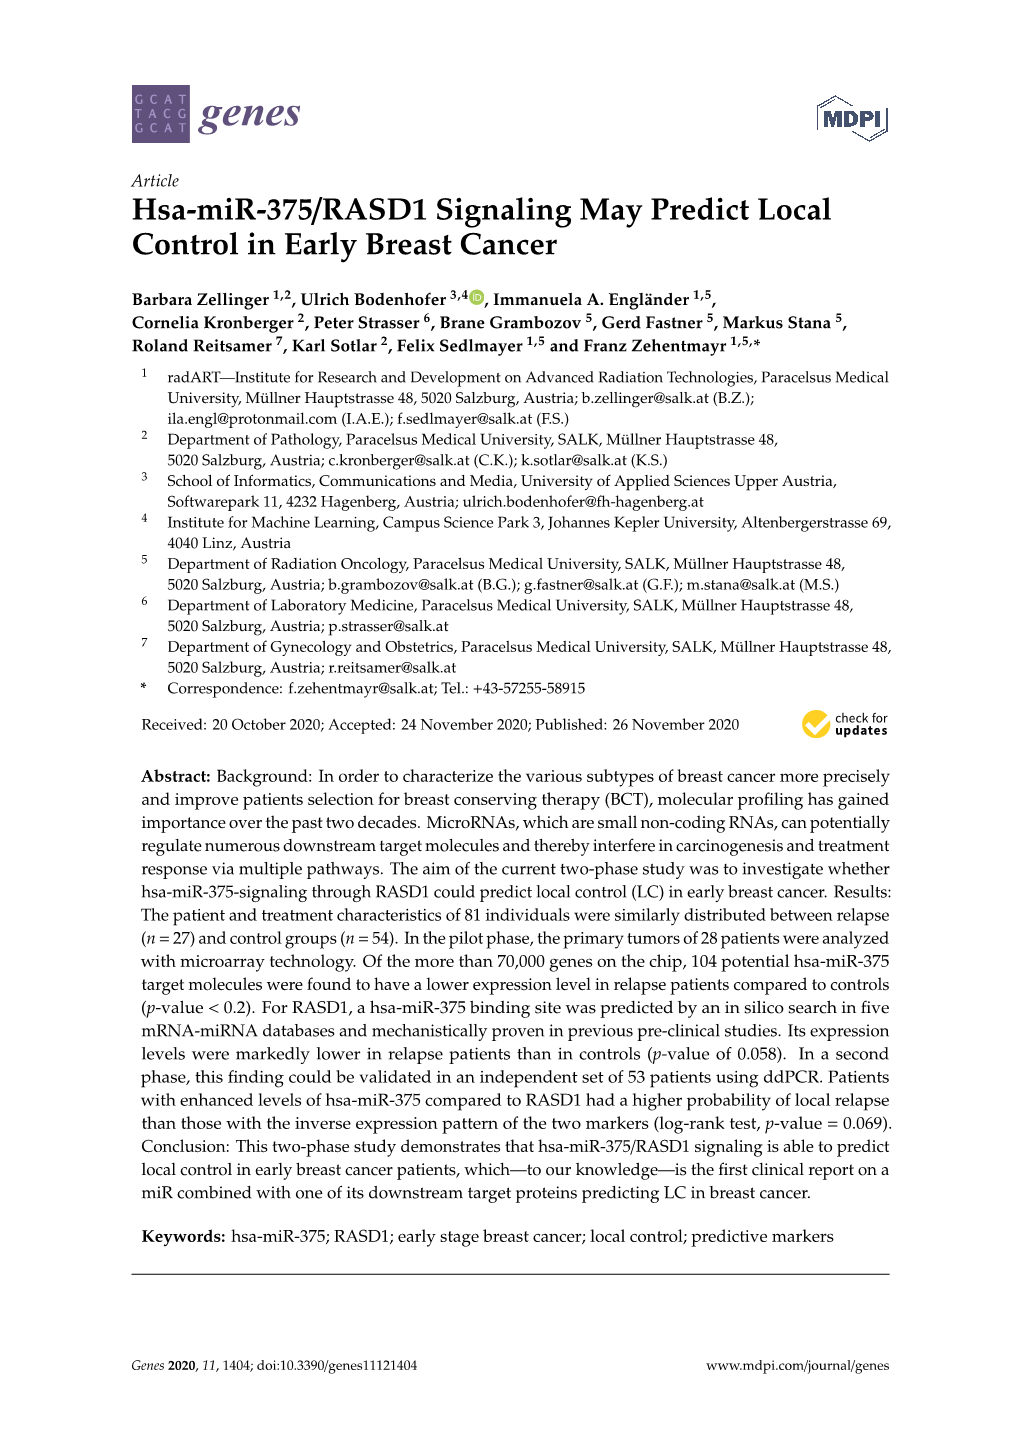 Hsa-Mir-375/RASD1 Signaling May Predict Local Control in Early Breast Cancer